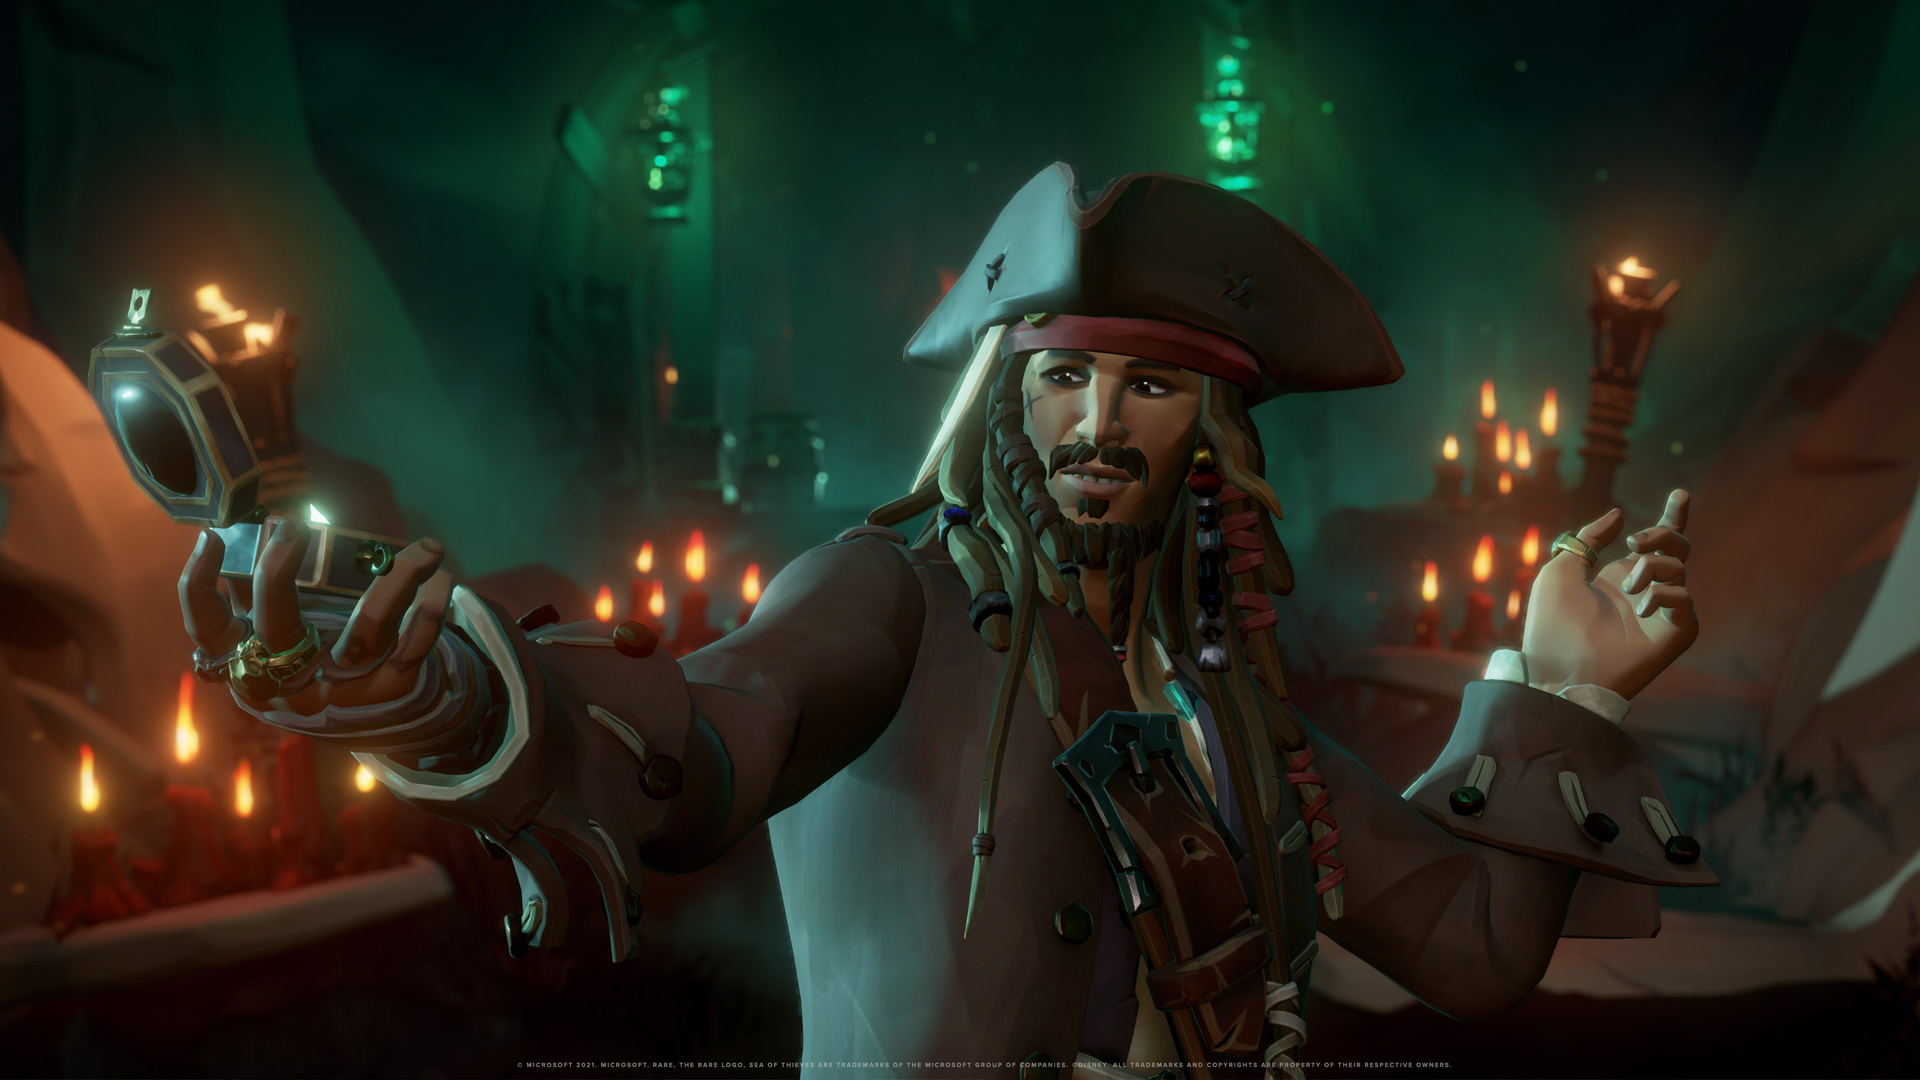  See Jack Sparrow in action in a new Sea of Thieves gameplay video 